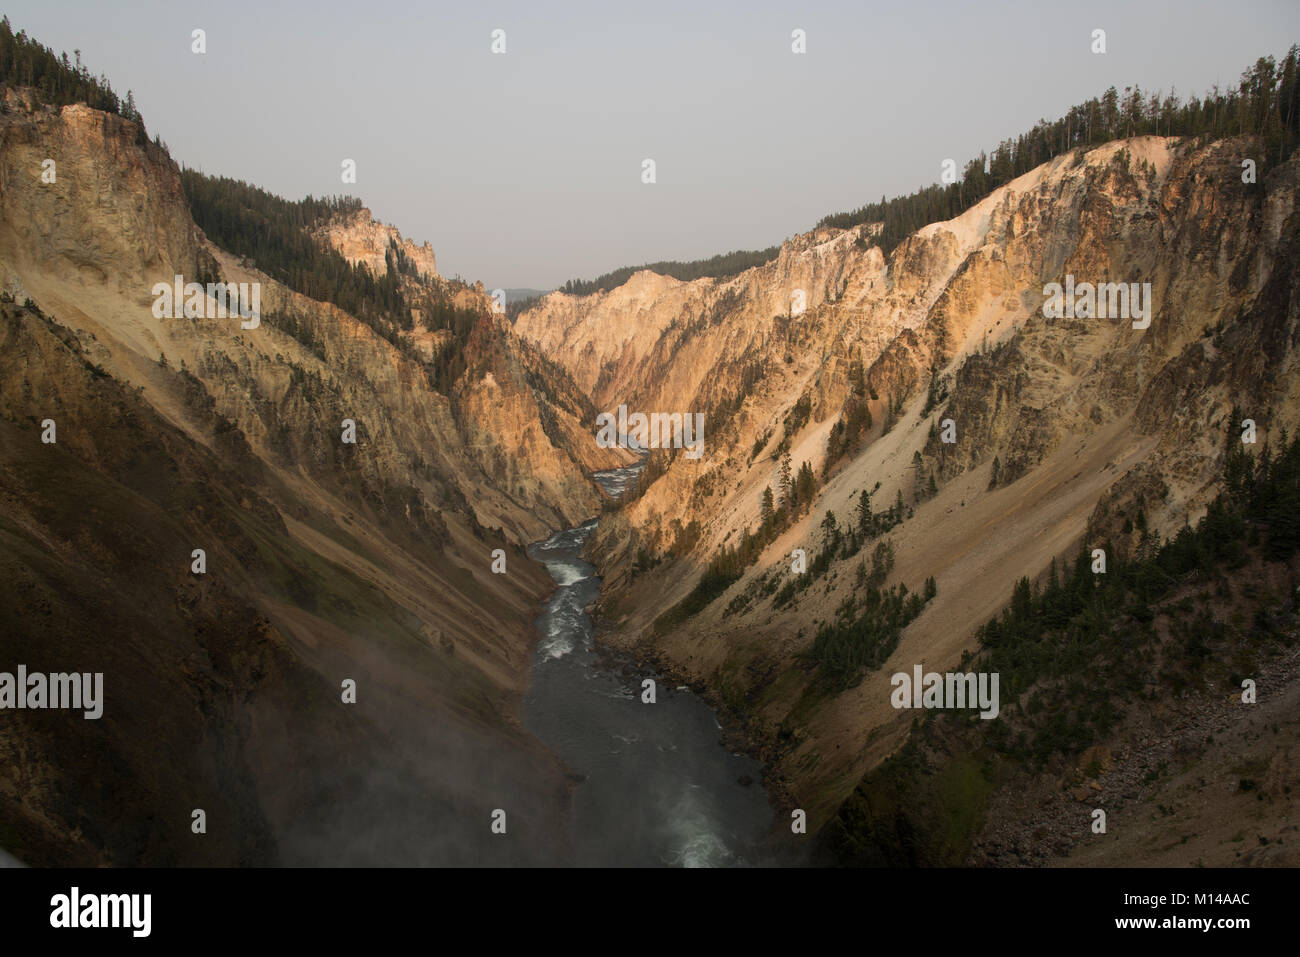 The Yellowstone River flows through the Grand Canyon of the Yellowstone. Stock Photo